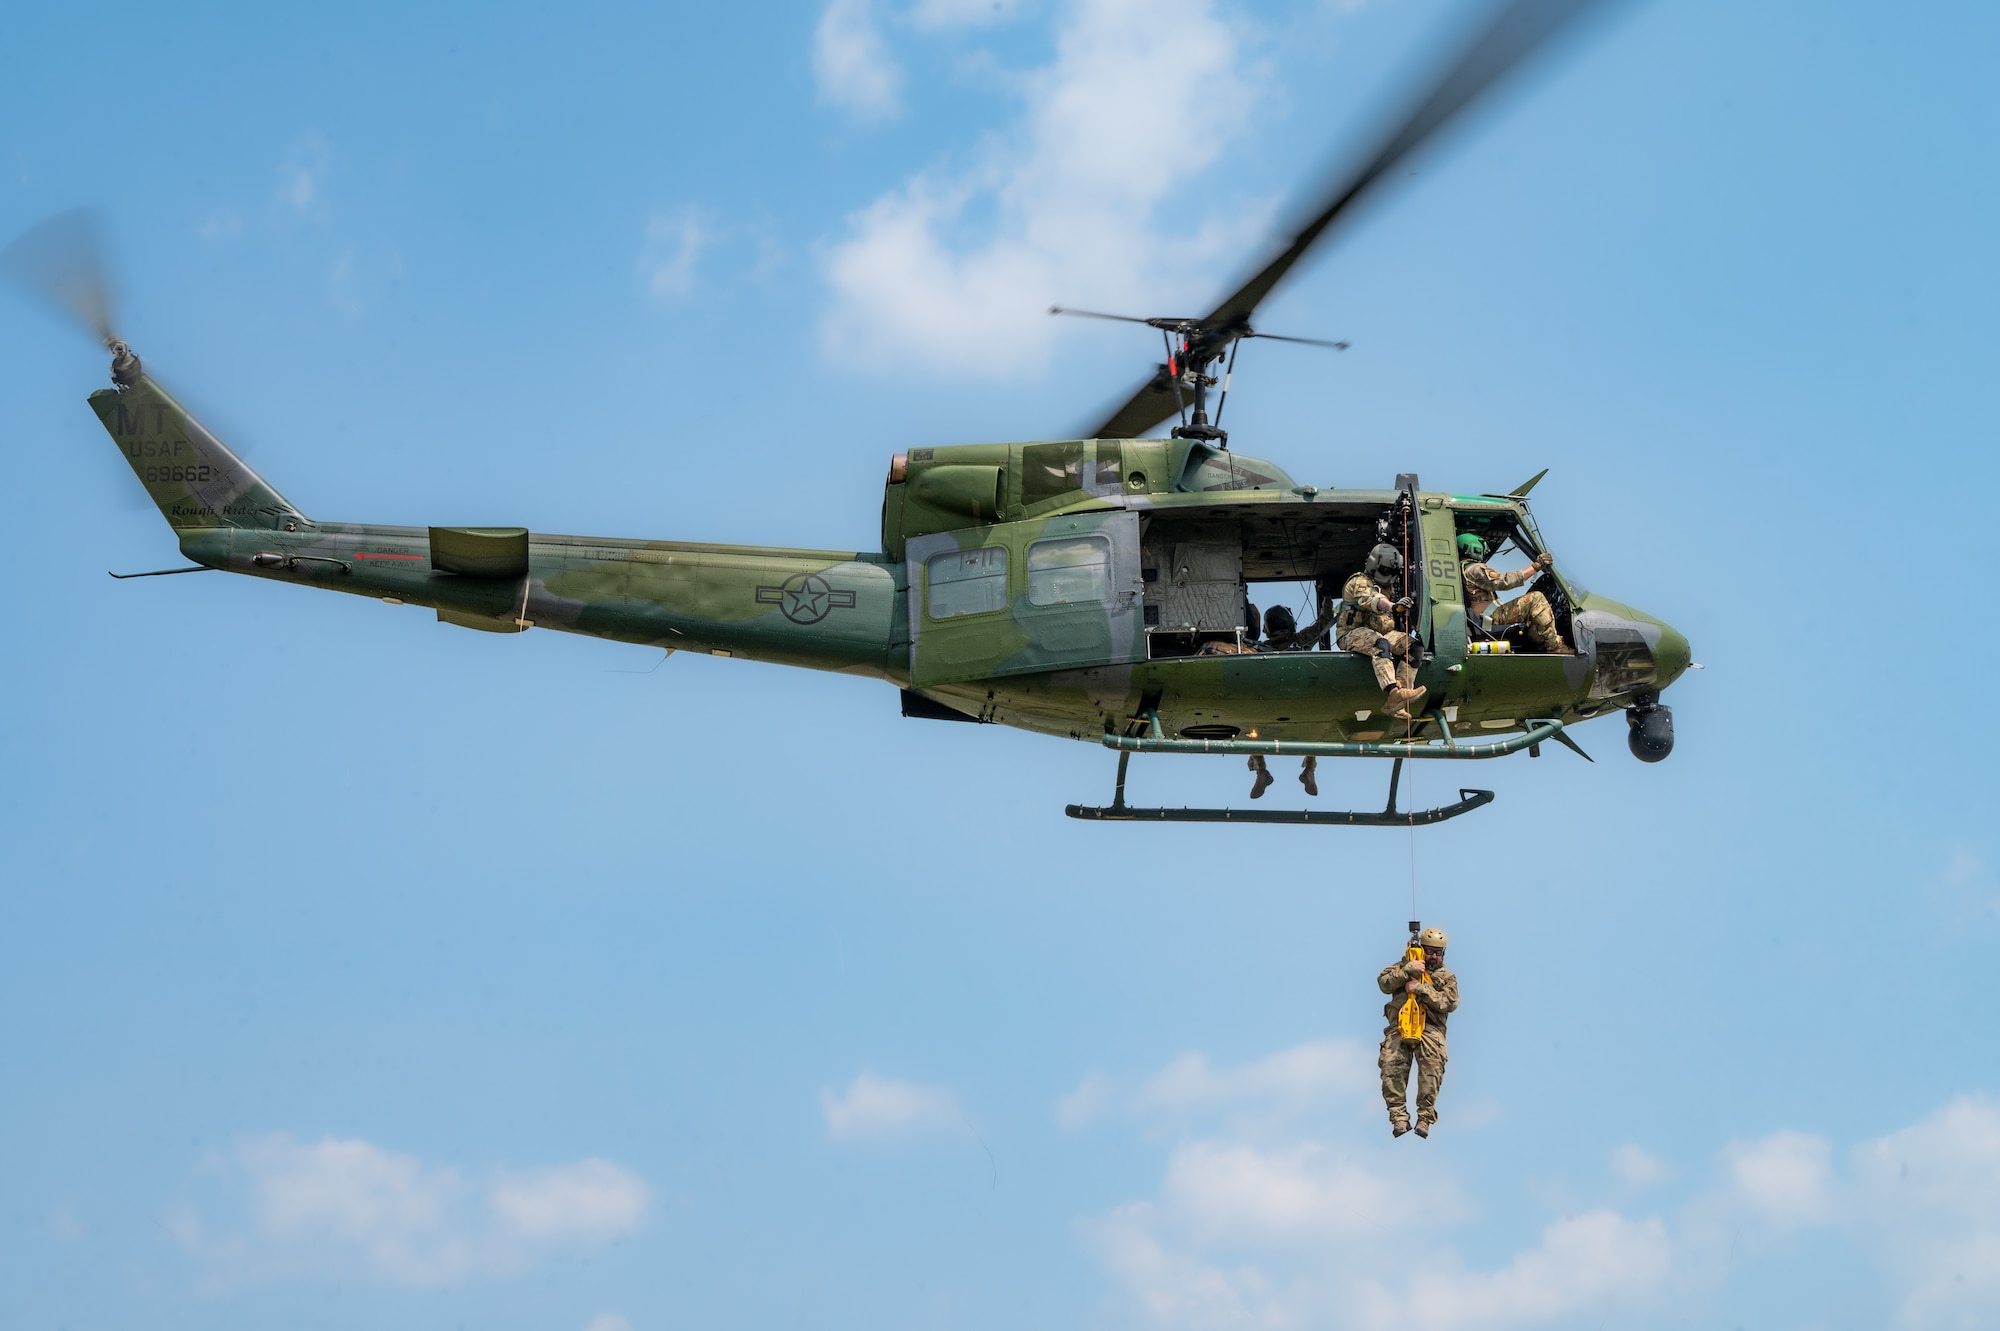 Airmen assigned to the 54th Helicopter Squadron (HS) perform personnel recovery training with aircrew at the Air National Guard training grounds in Garrison, North Dakota, May 24, 2023. The 54th HS provides a rapidly-deployable, combat rescue and reaction force response utilizing UH-1 Huey helicopters. (U.S. Air Force photo by Airman 1st Class Alexander Nottingham)